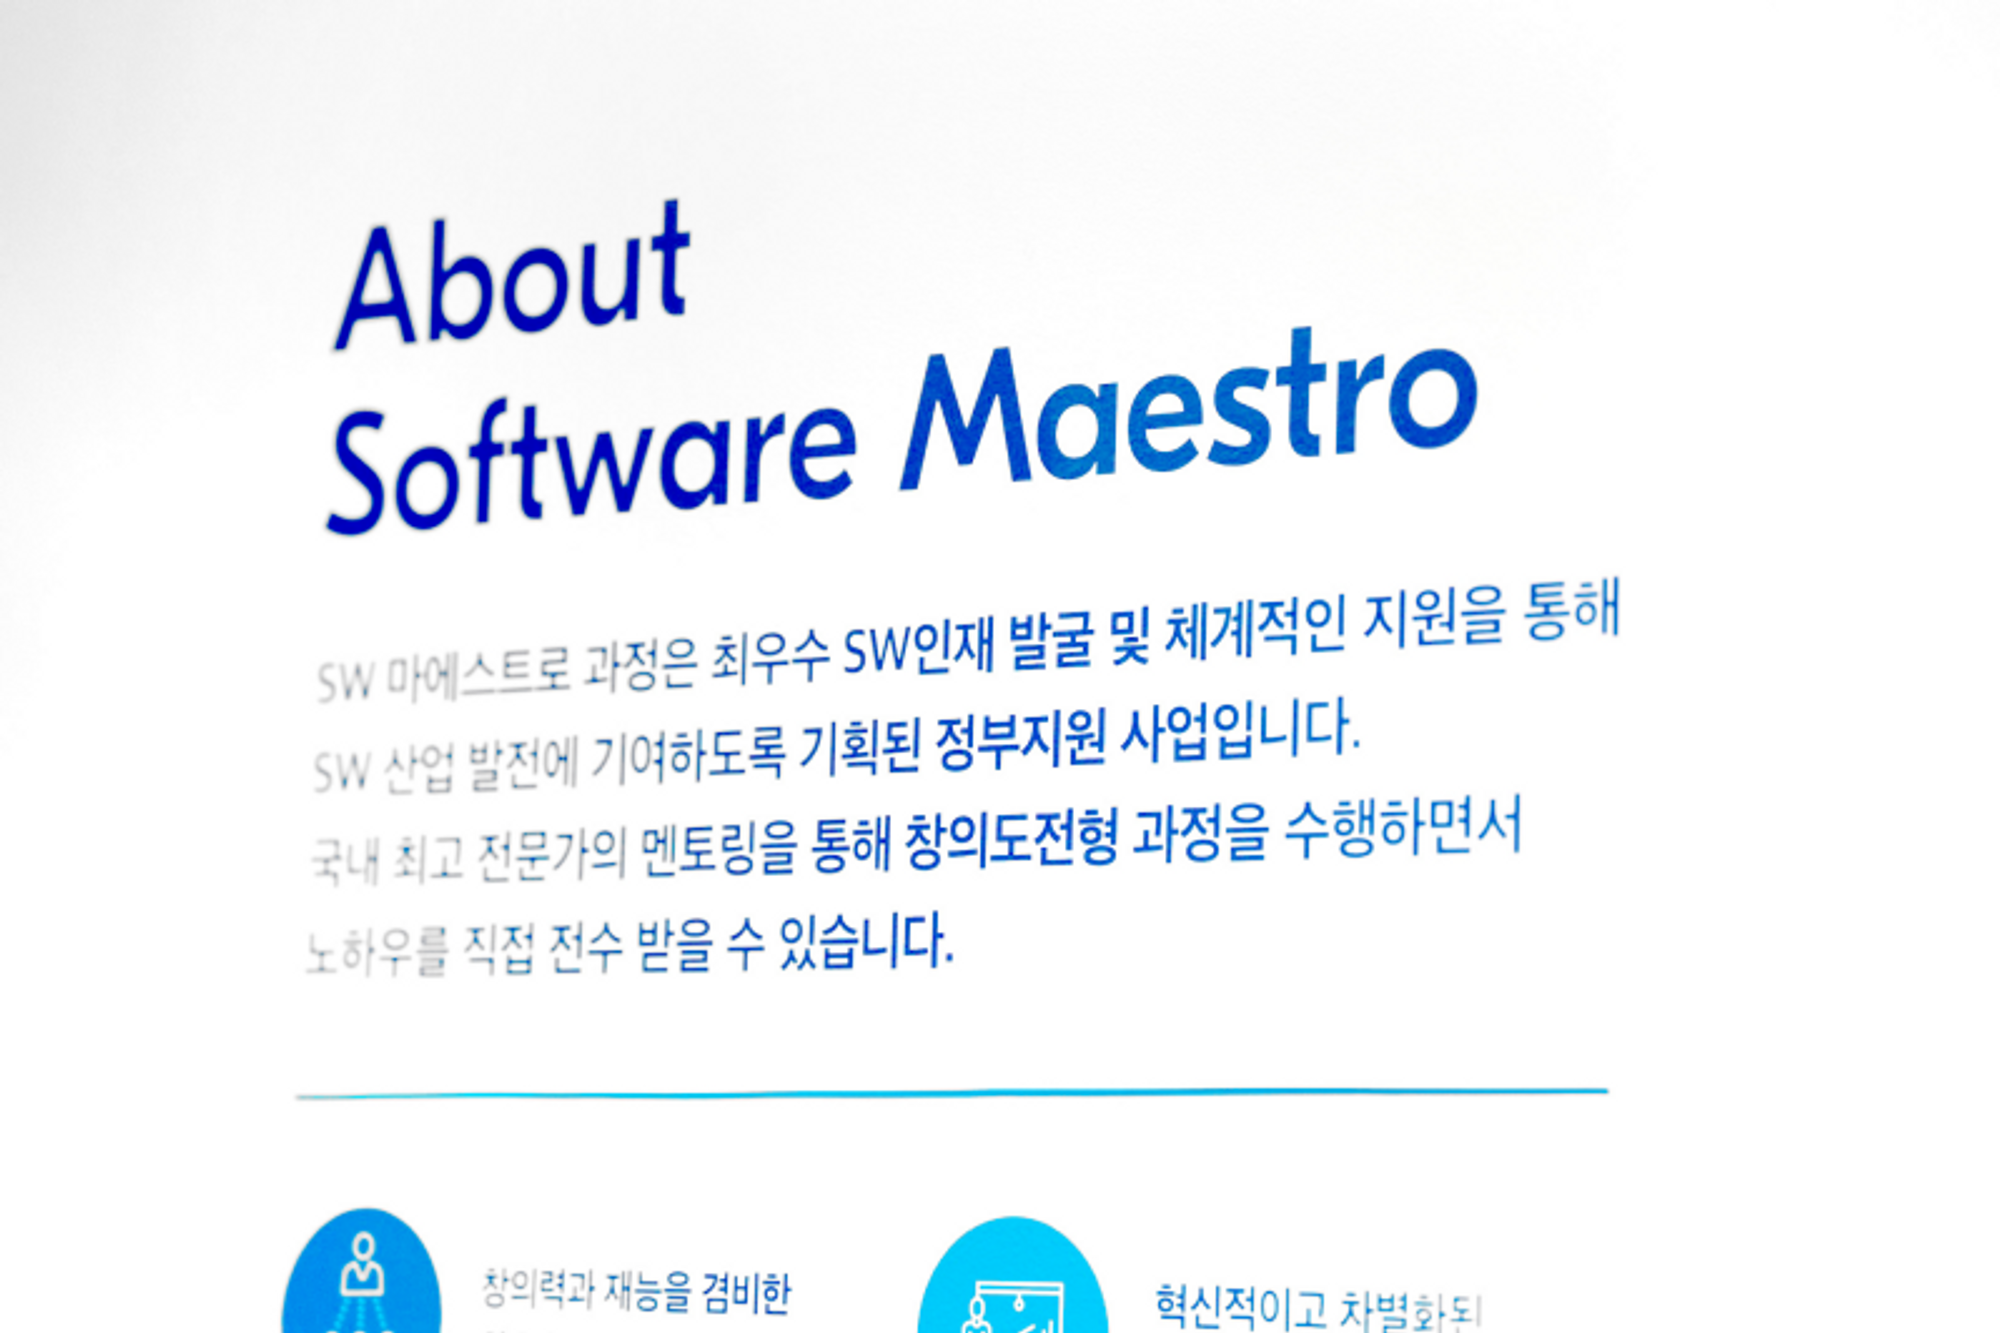 Job competency assessment, enterprise coding test, multi-faceted assessment, real-time monitoring system, SW maestro